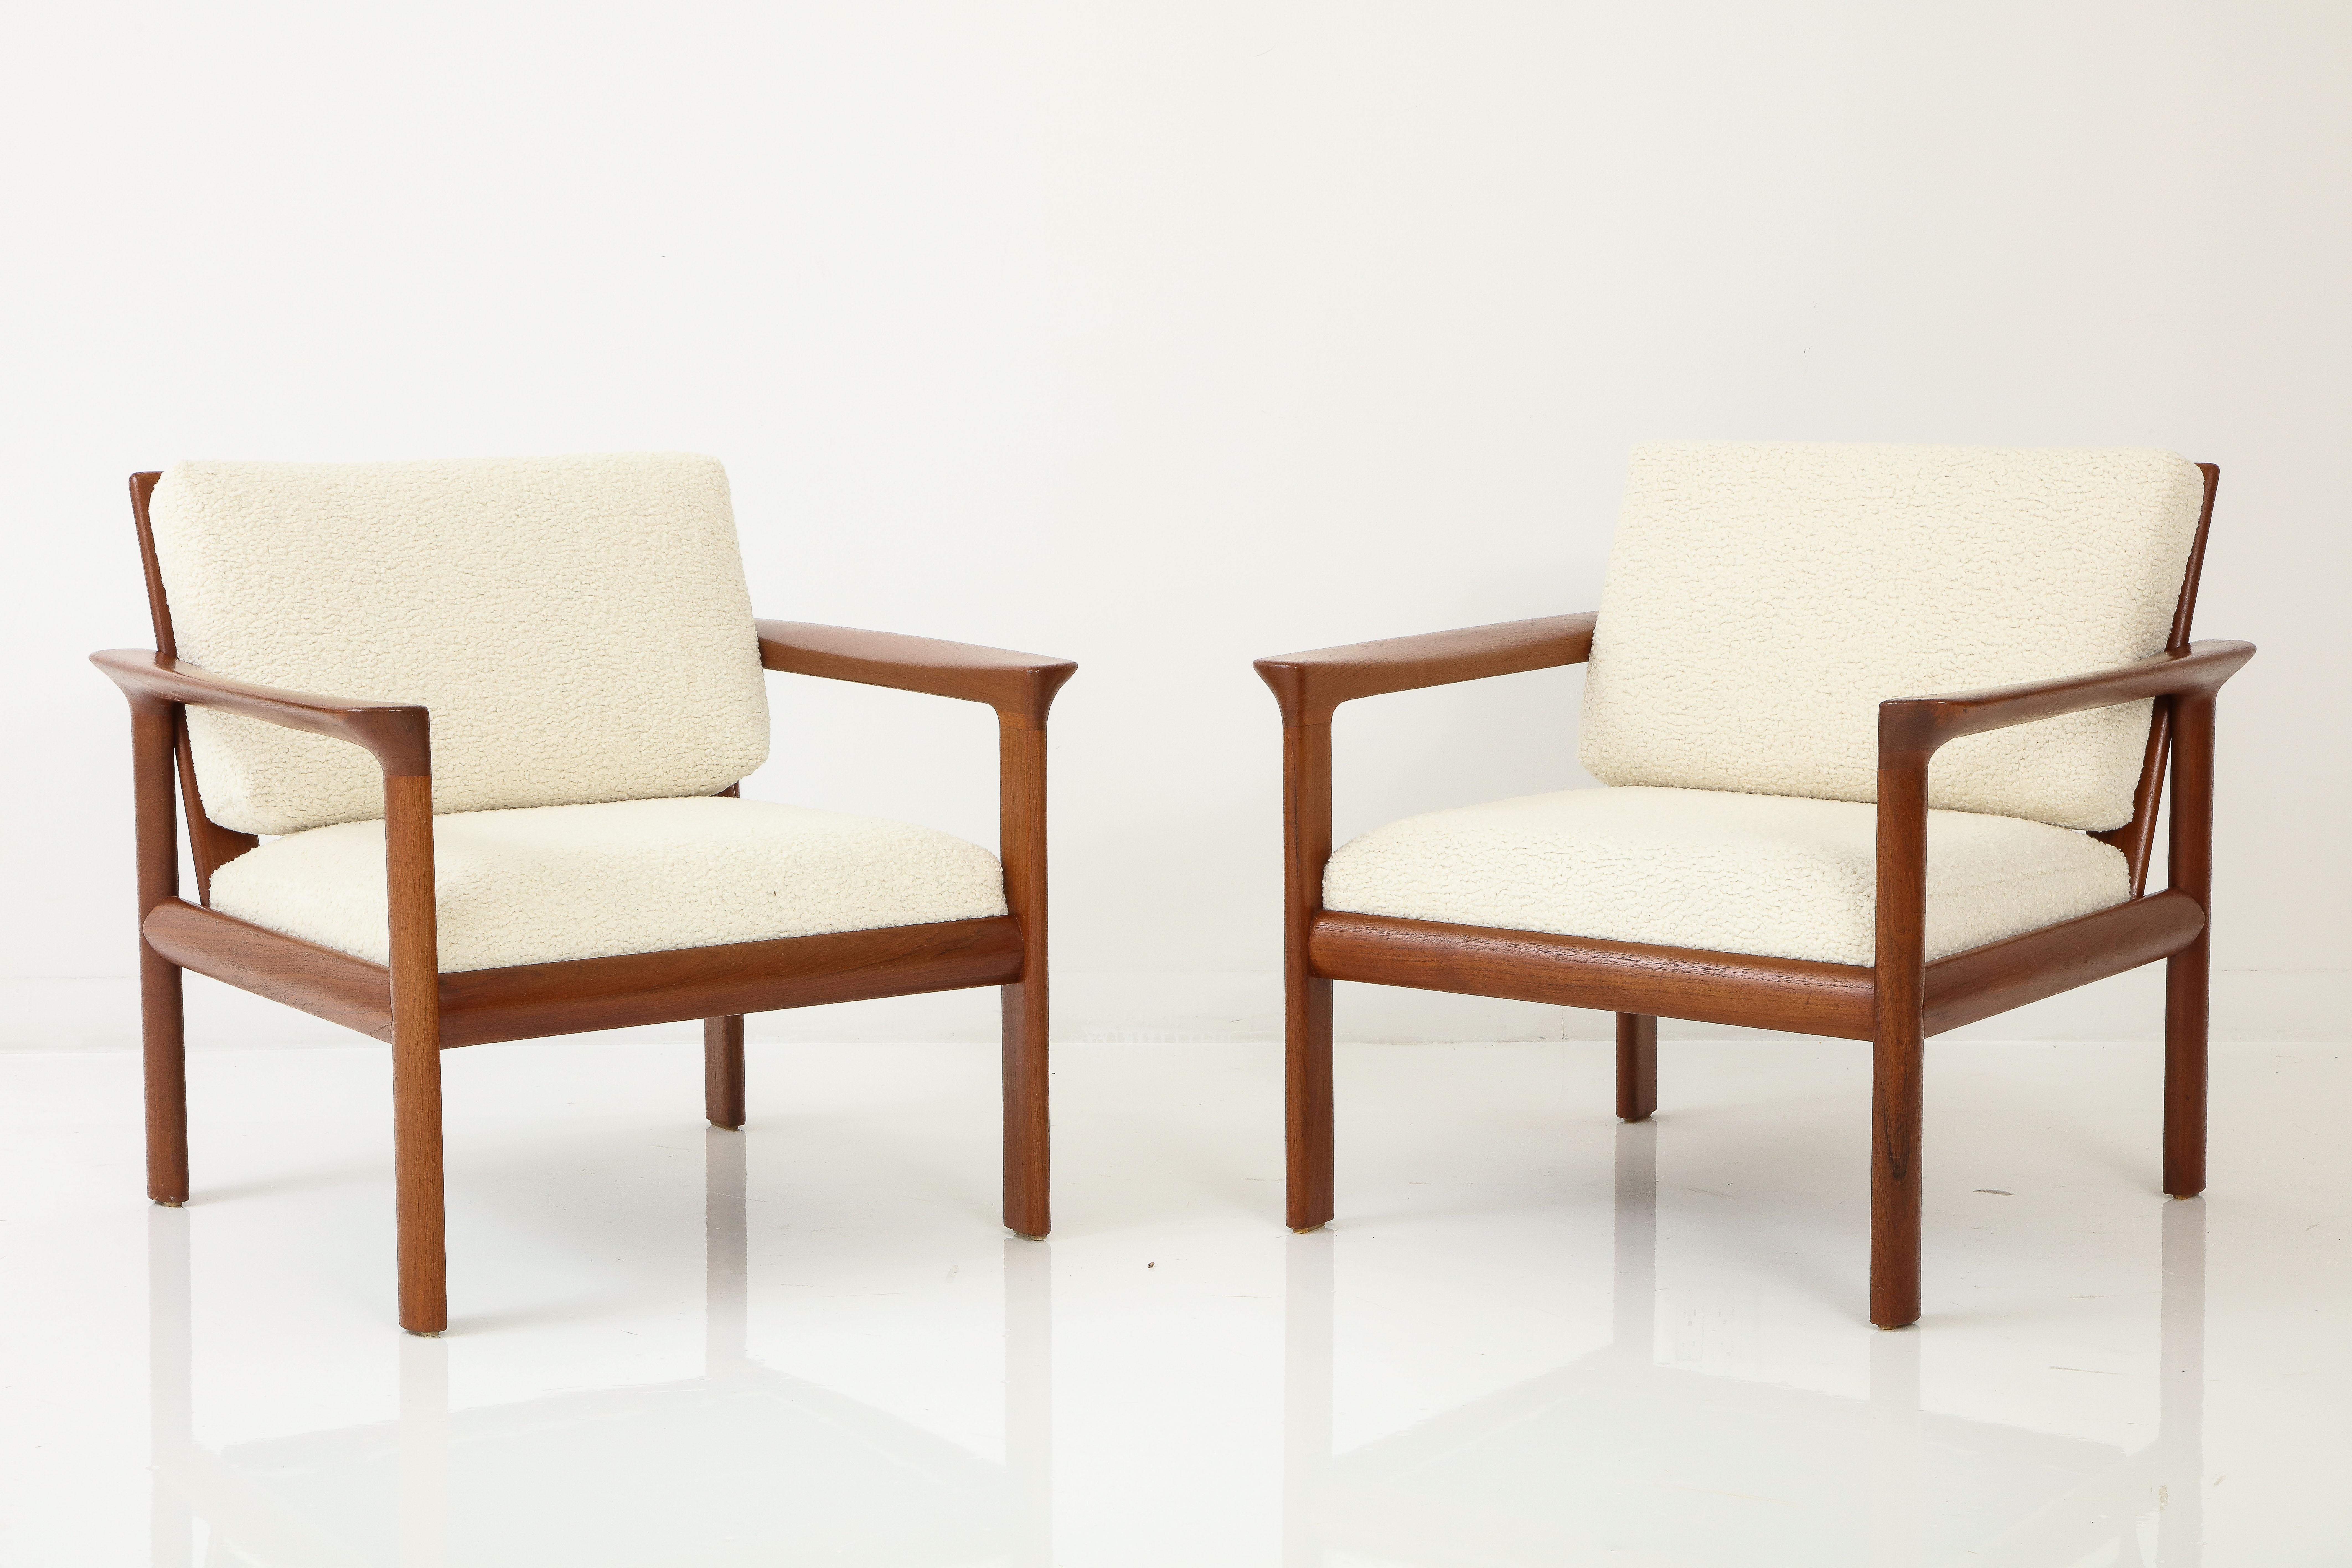 Stunning pair of 1970's Mid-Century Modern sculptural chunky teak frame lounge chairs designed by Sven Ellekaer for Comfort, fully restored with new Bouclé fabric cushions.